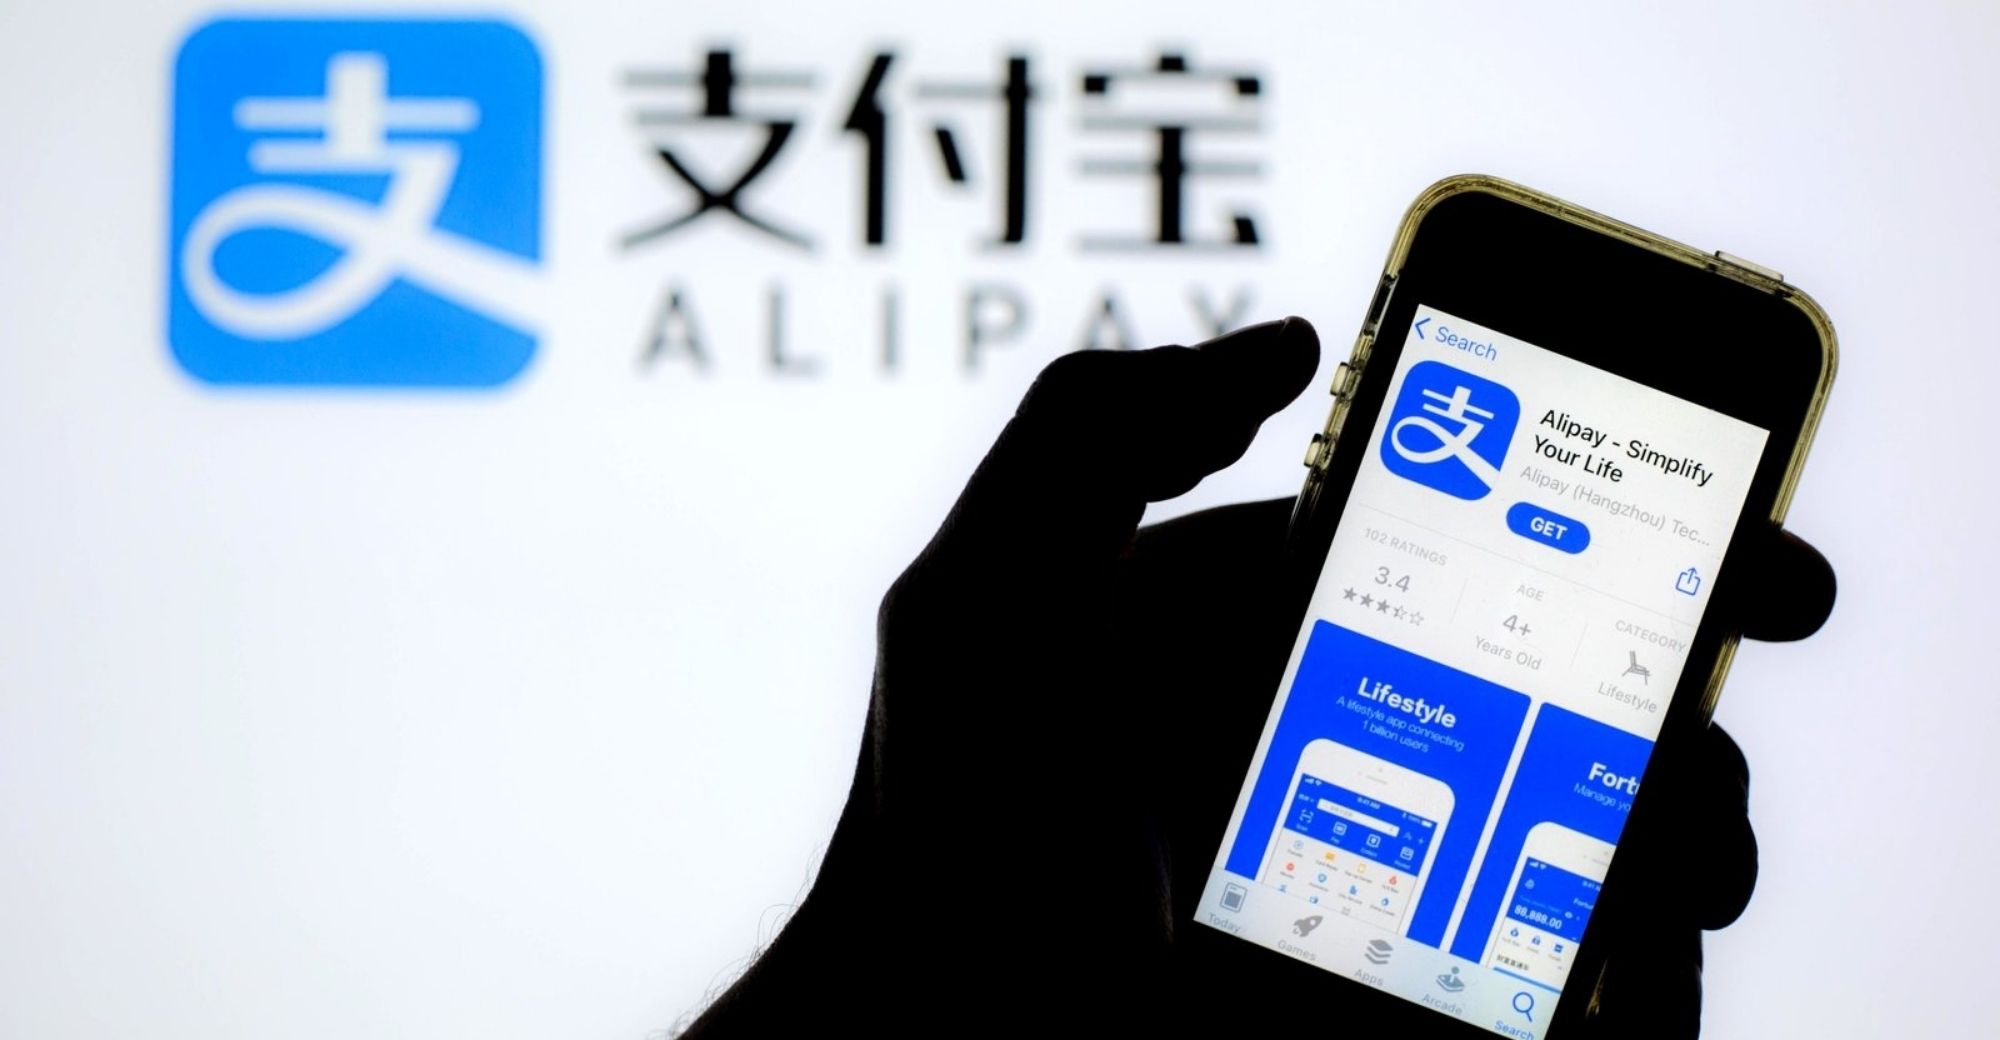 Ant Group Initiates Largest Executive Rotation in Nearly 7 Years at Alipay